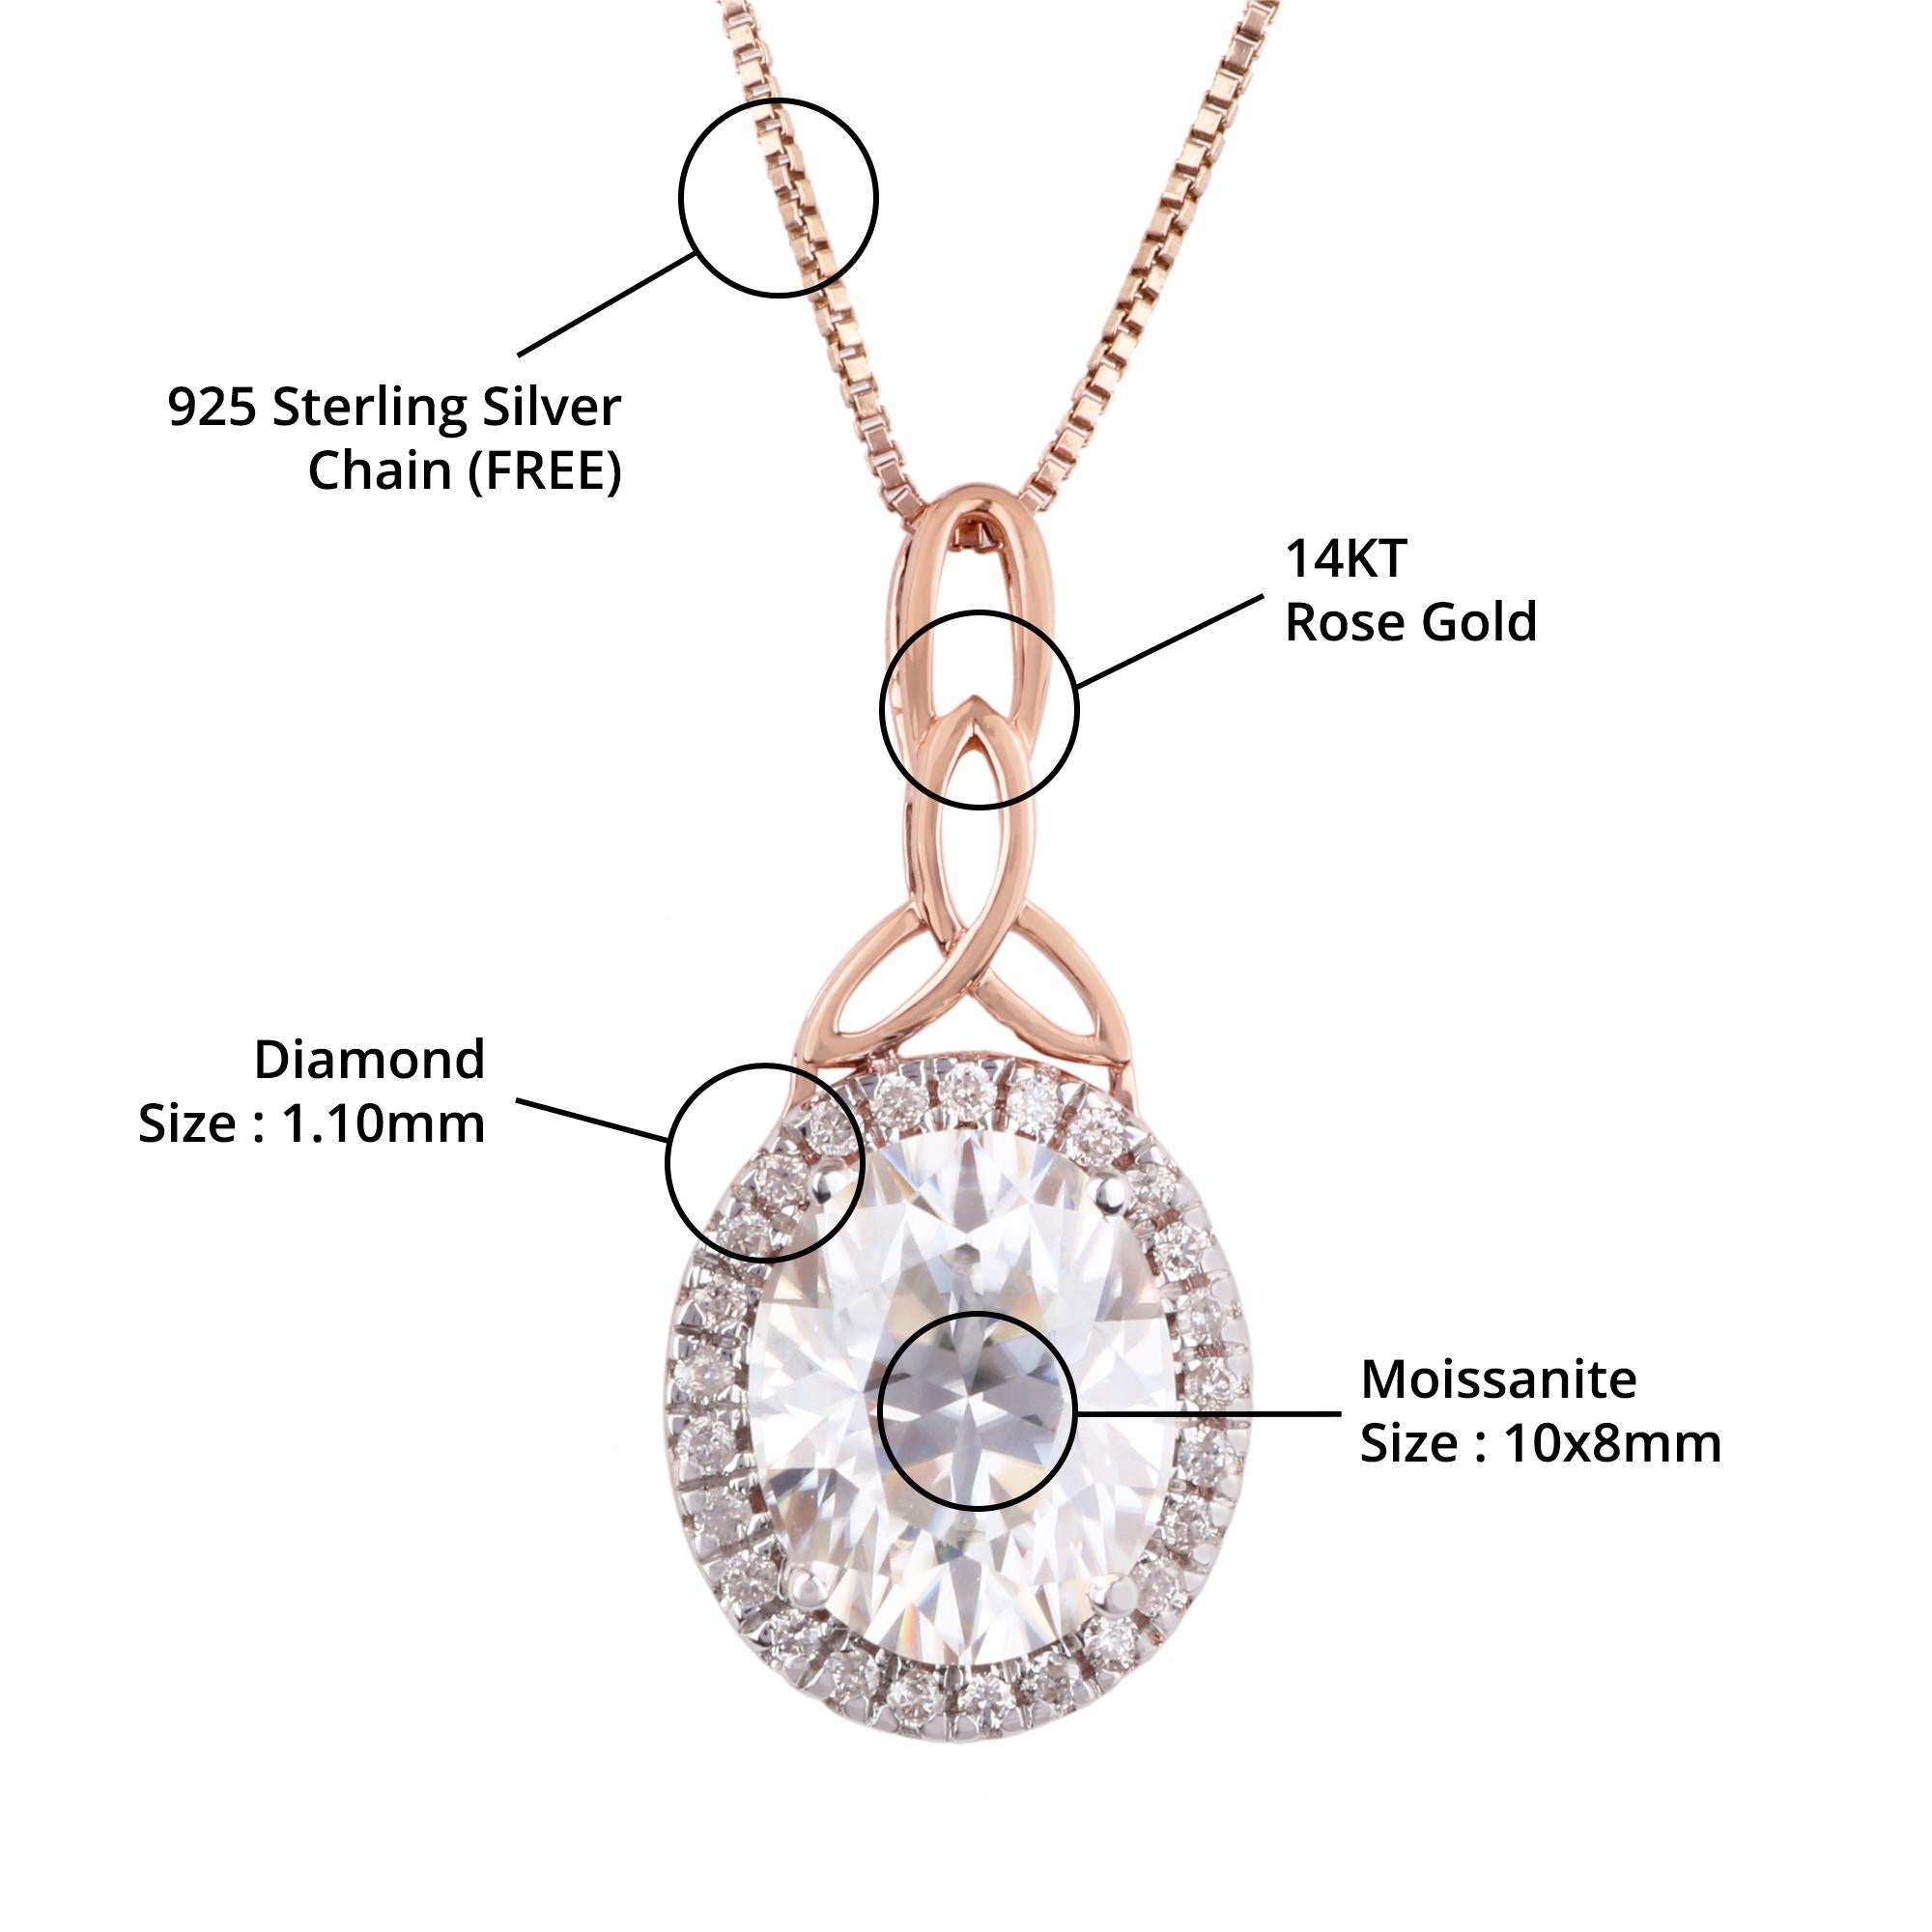 Item details:-

✦ SKU:- JPD00187RRR

✦ Material :- Gold

✦ Metal Purity : 14K Rose Gold

✦ Gemstone Specification:- 
✧ Clear Diamond Round (l1/H1) - 1.10 mm - 25 Pcs
✧ Clear moissanite Round (VVS/DE) - 10x8 mm - 1 Pc


✦ Approx. Clear Diamond Weight